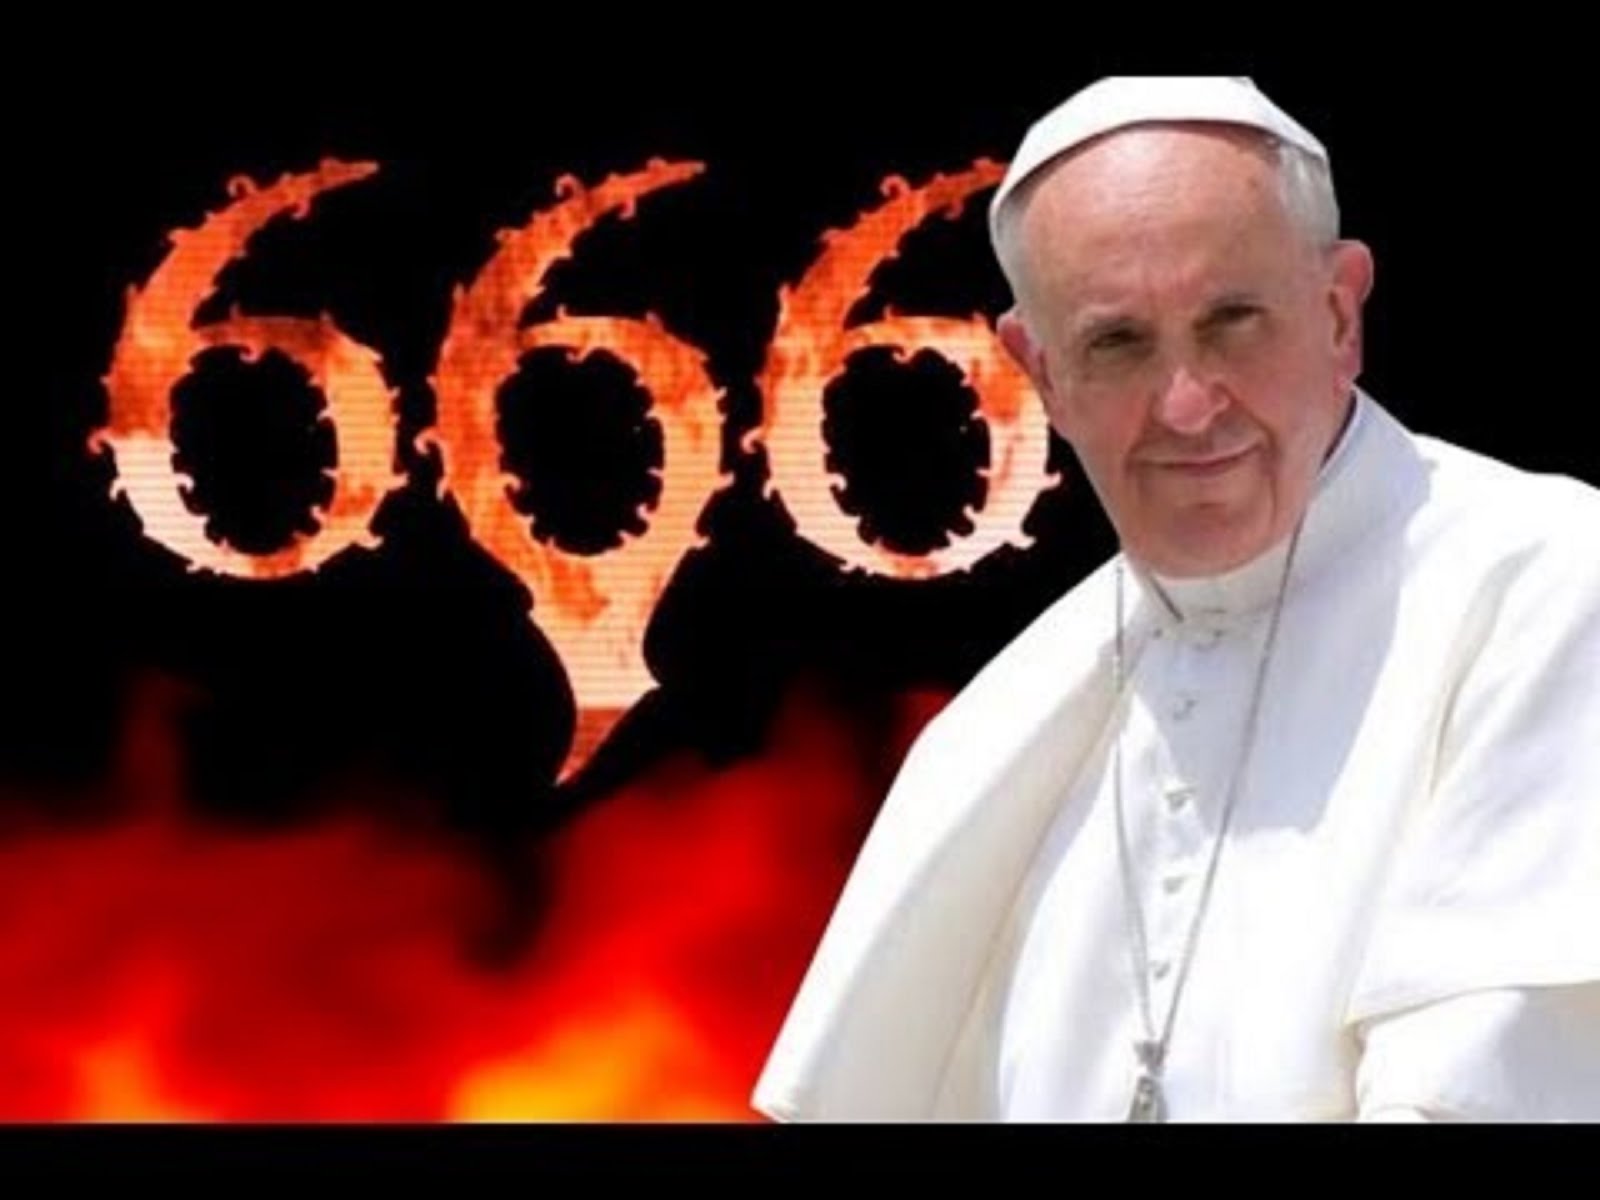 POPE FRANCIS 666